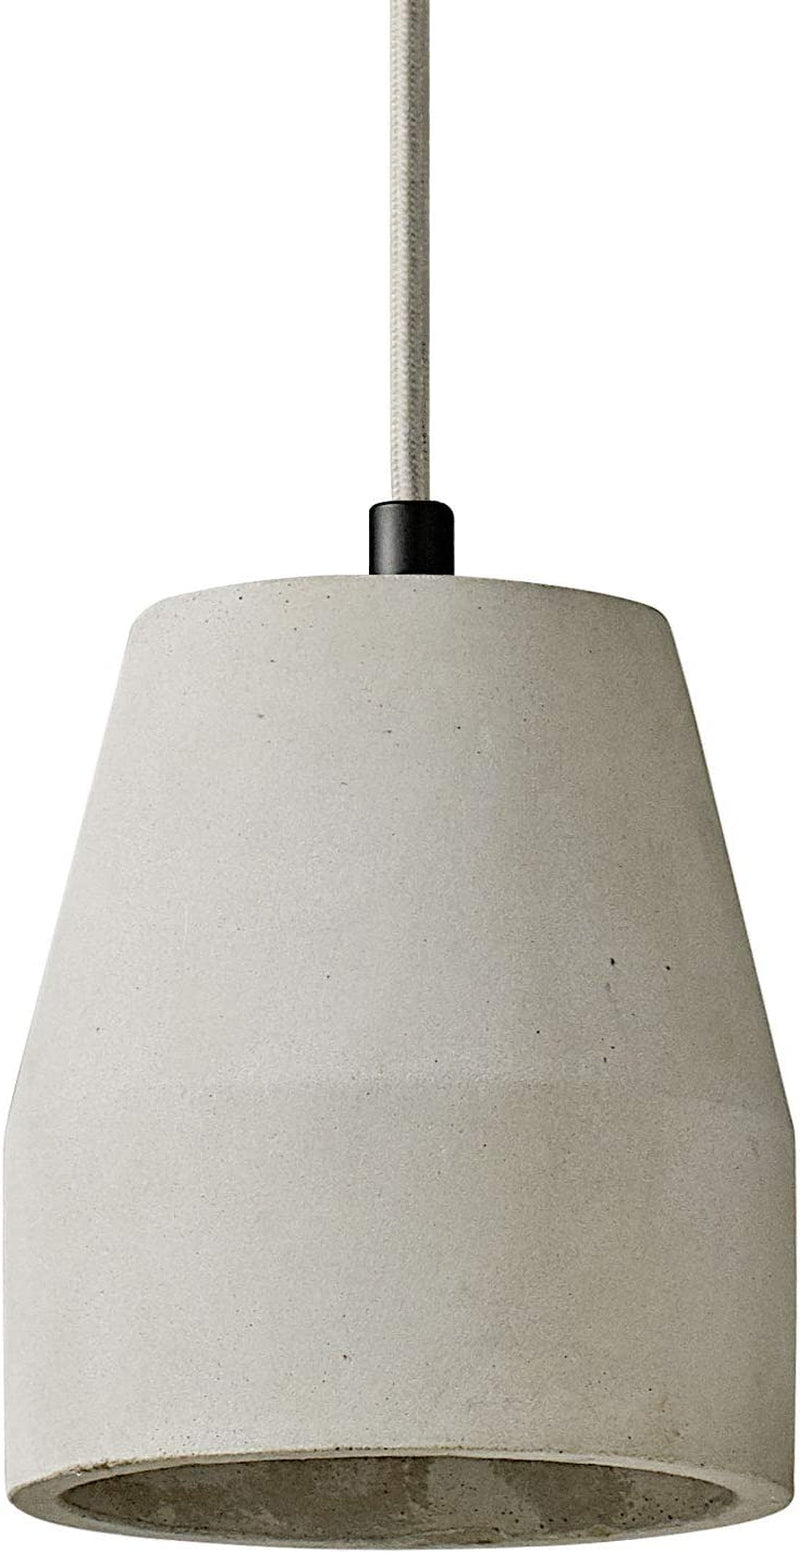 MOTINI Concrete Pendant Light in Gray Finish, Modern Industrial Mini Ceiling Hanging Cement Pendant Lighting Fixture for Kitchen Island Dining Room Living Room Bedroom